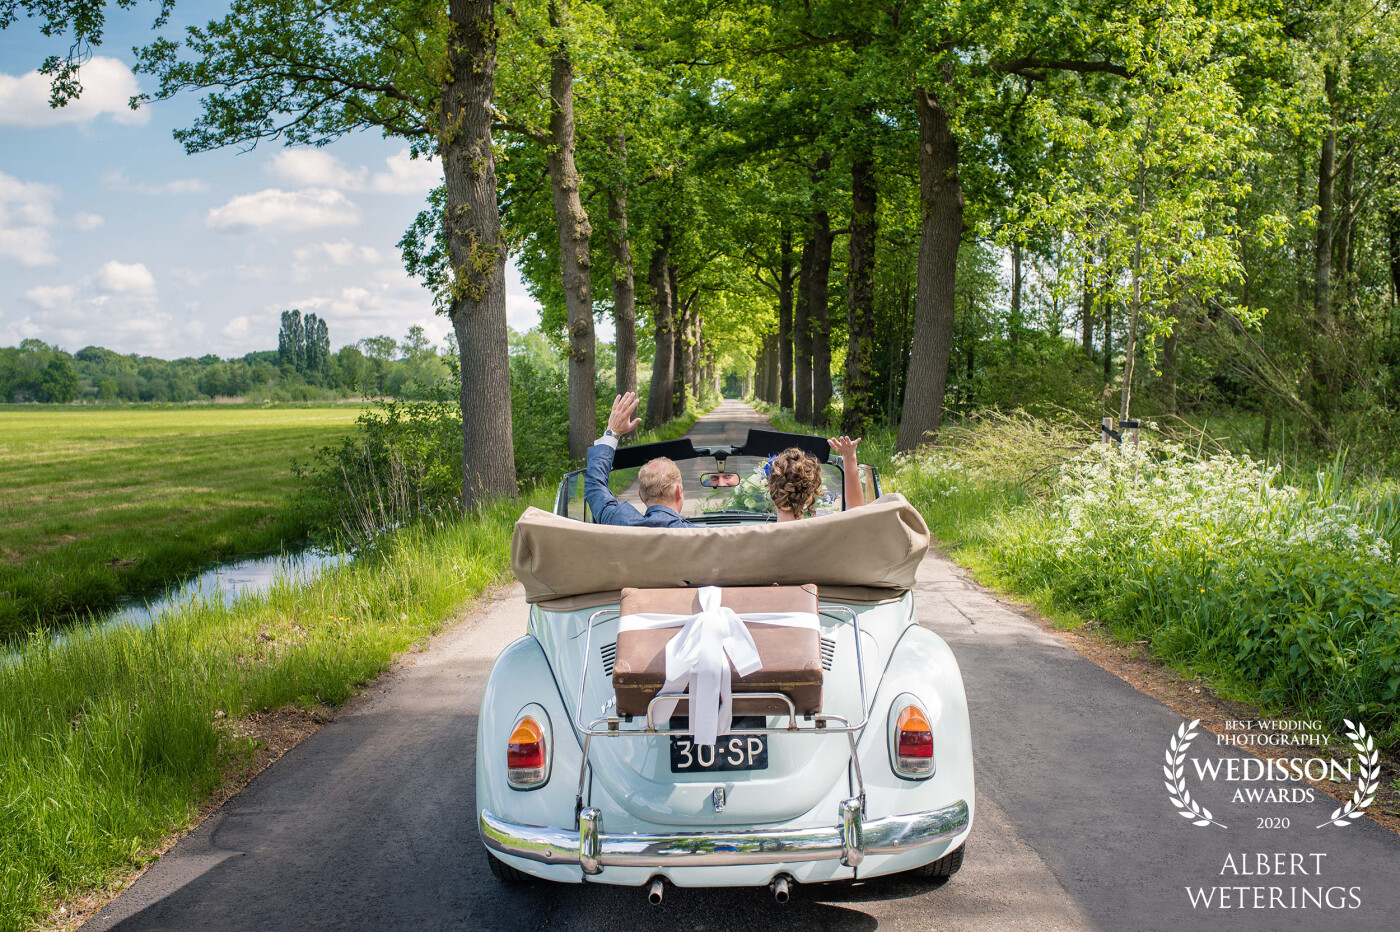 On a lovely summer day, we went to Zeist for the wedding of H&J. They had arranged a lovely old VW Kever (or Beetle) Cabrio as their car for the day. When they drove off from the house of the bride and waved goodbye to the family, we captured this great moment.